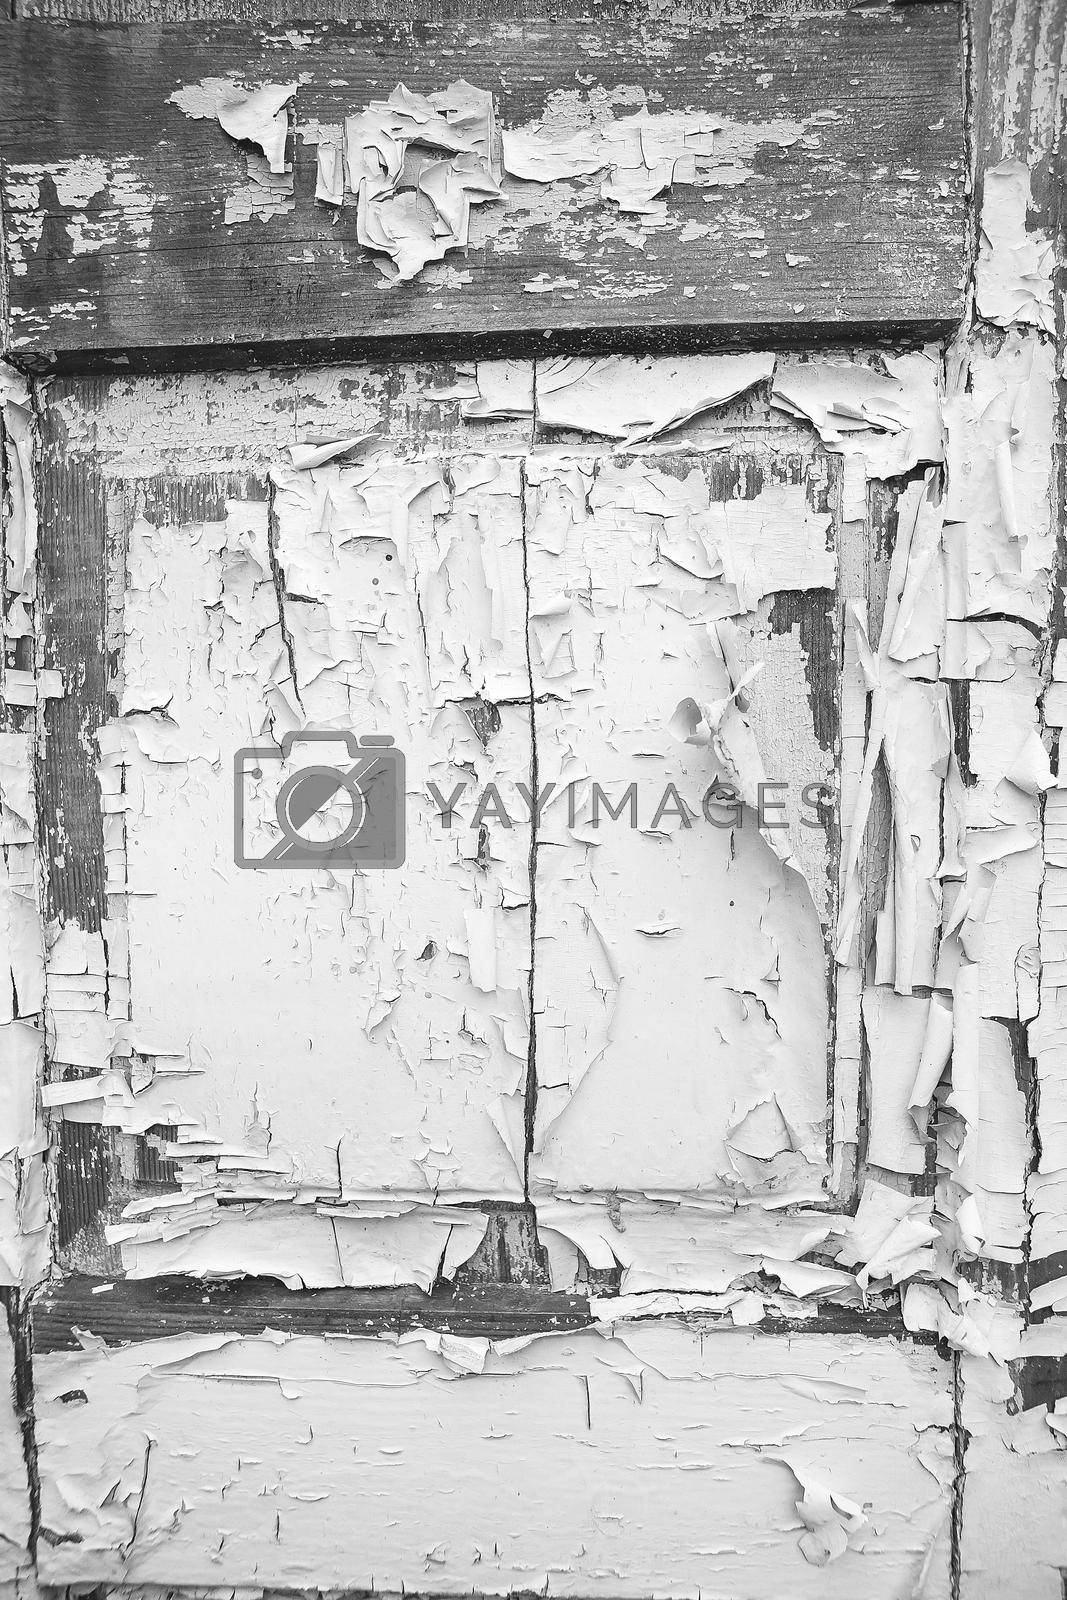 Very old wooden door with cracked paint, black and white.